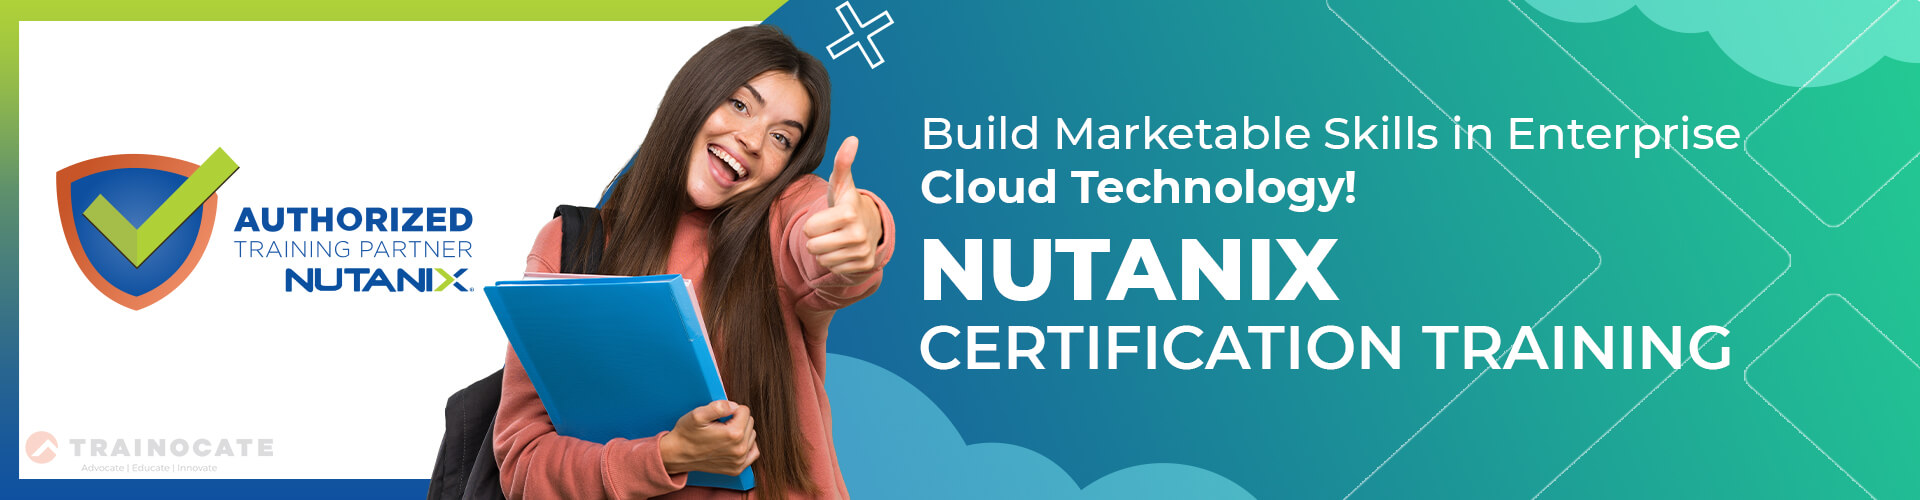 nutanix-public-schedue-highlight-page-banner-india